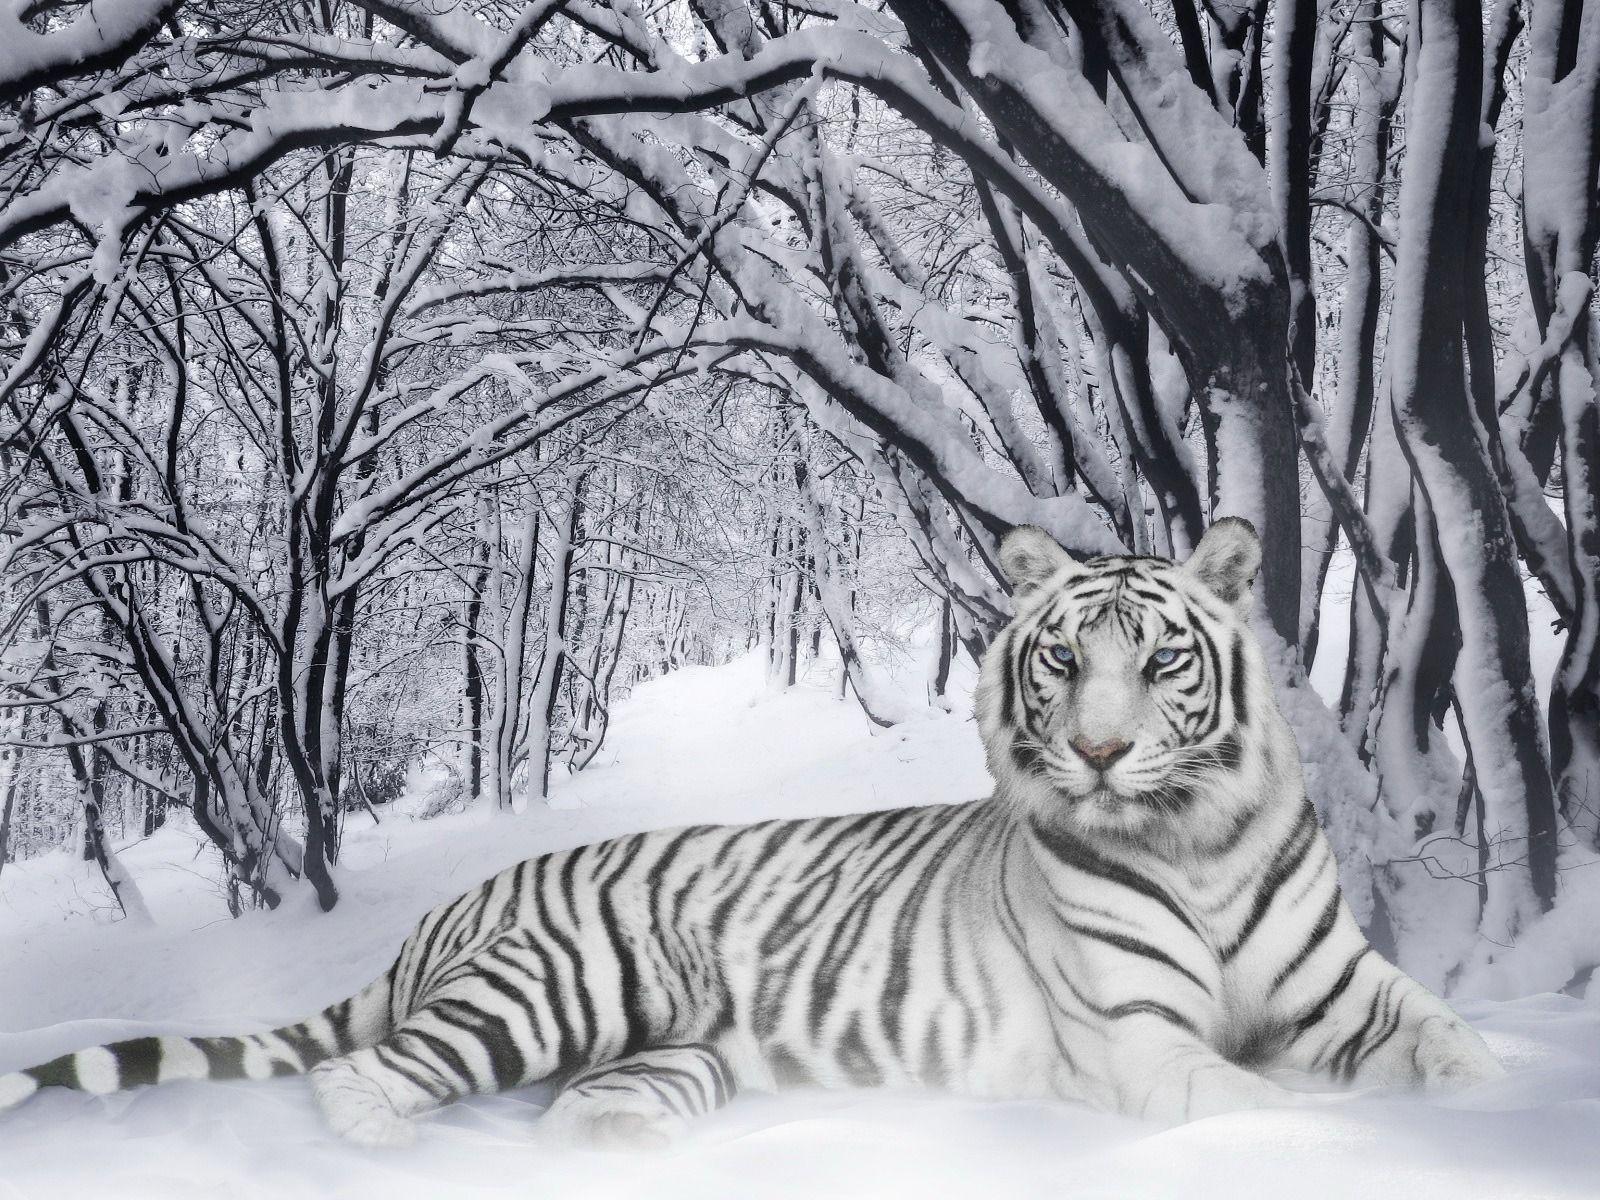 White Tiger Wallpapers Tigers Animals Wallpapers in jpg format for